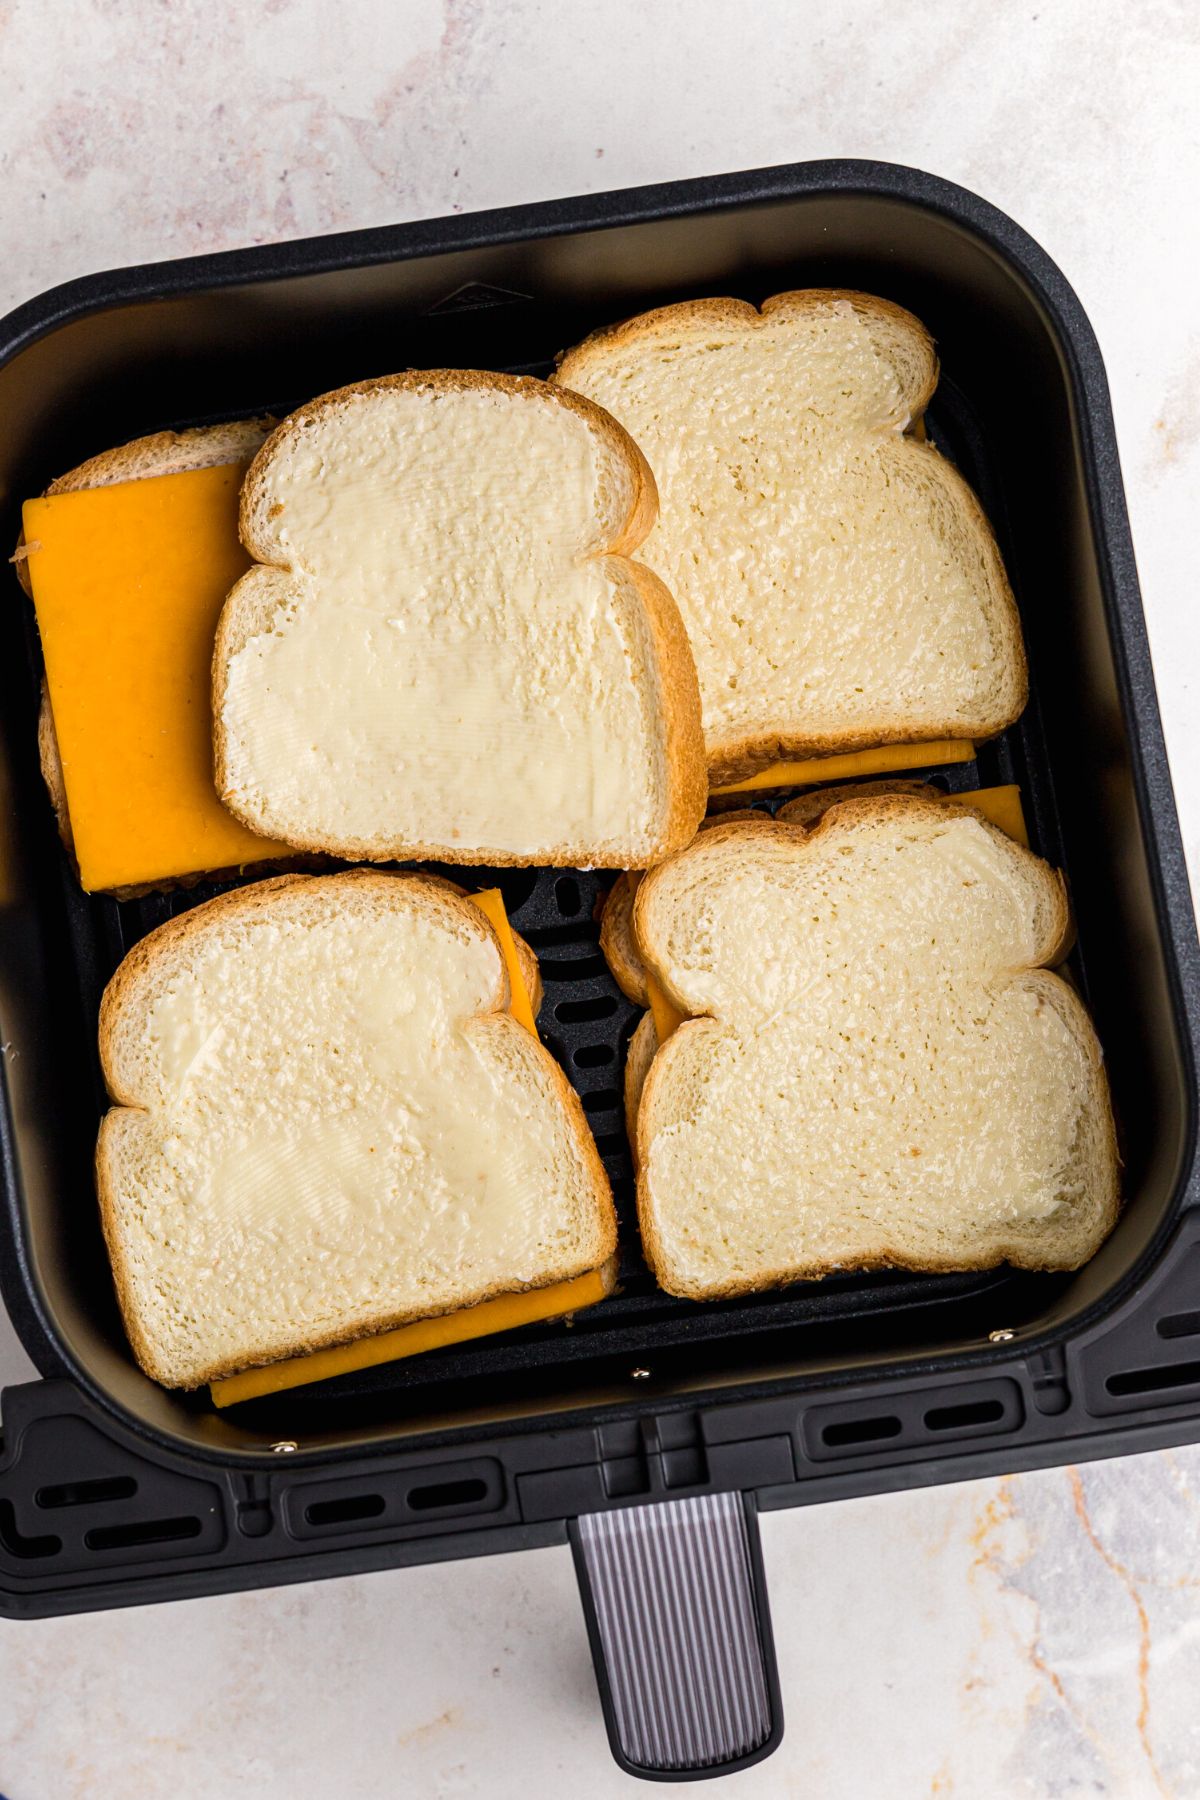 Breadslices topped with butter and filled with cheese slices in the air fryer basket.